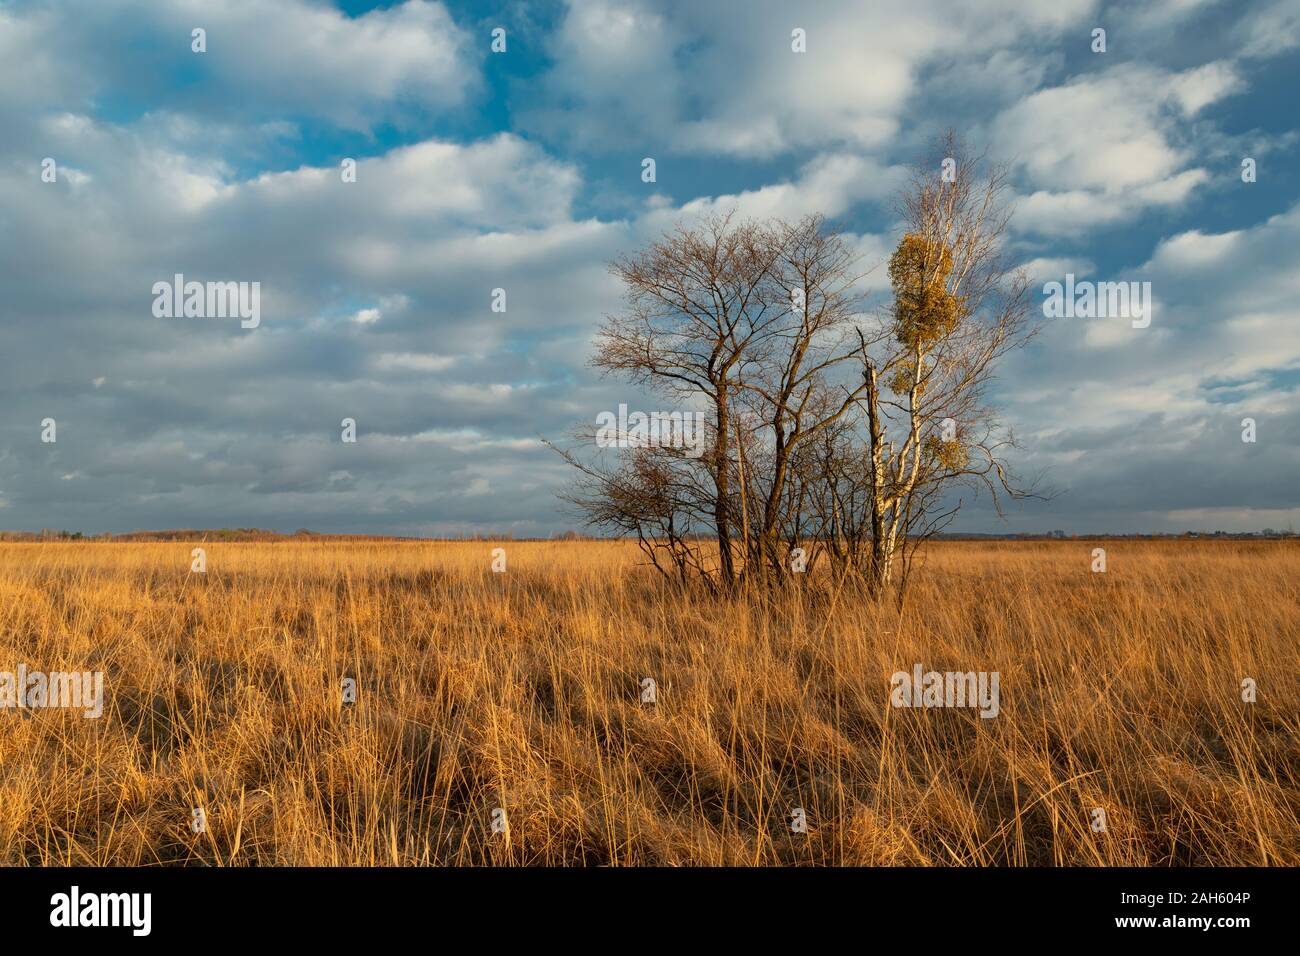 Tall grasses, trees without leaves and white clouds on the sky, swamp in Poland Stock Photo